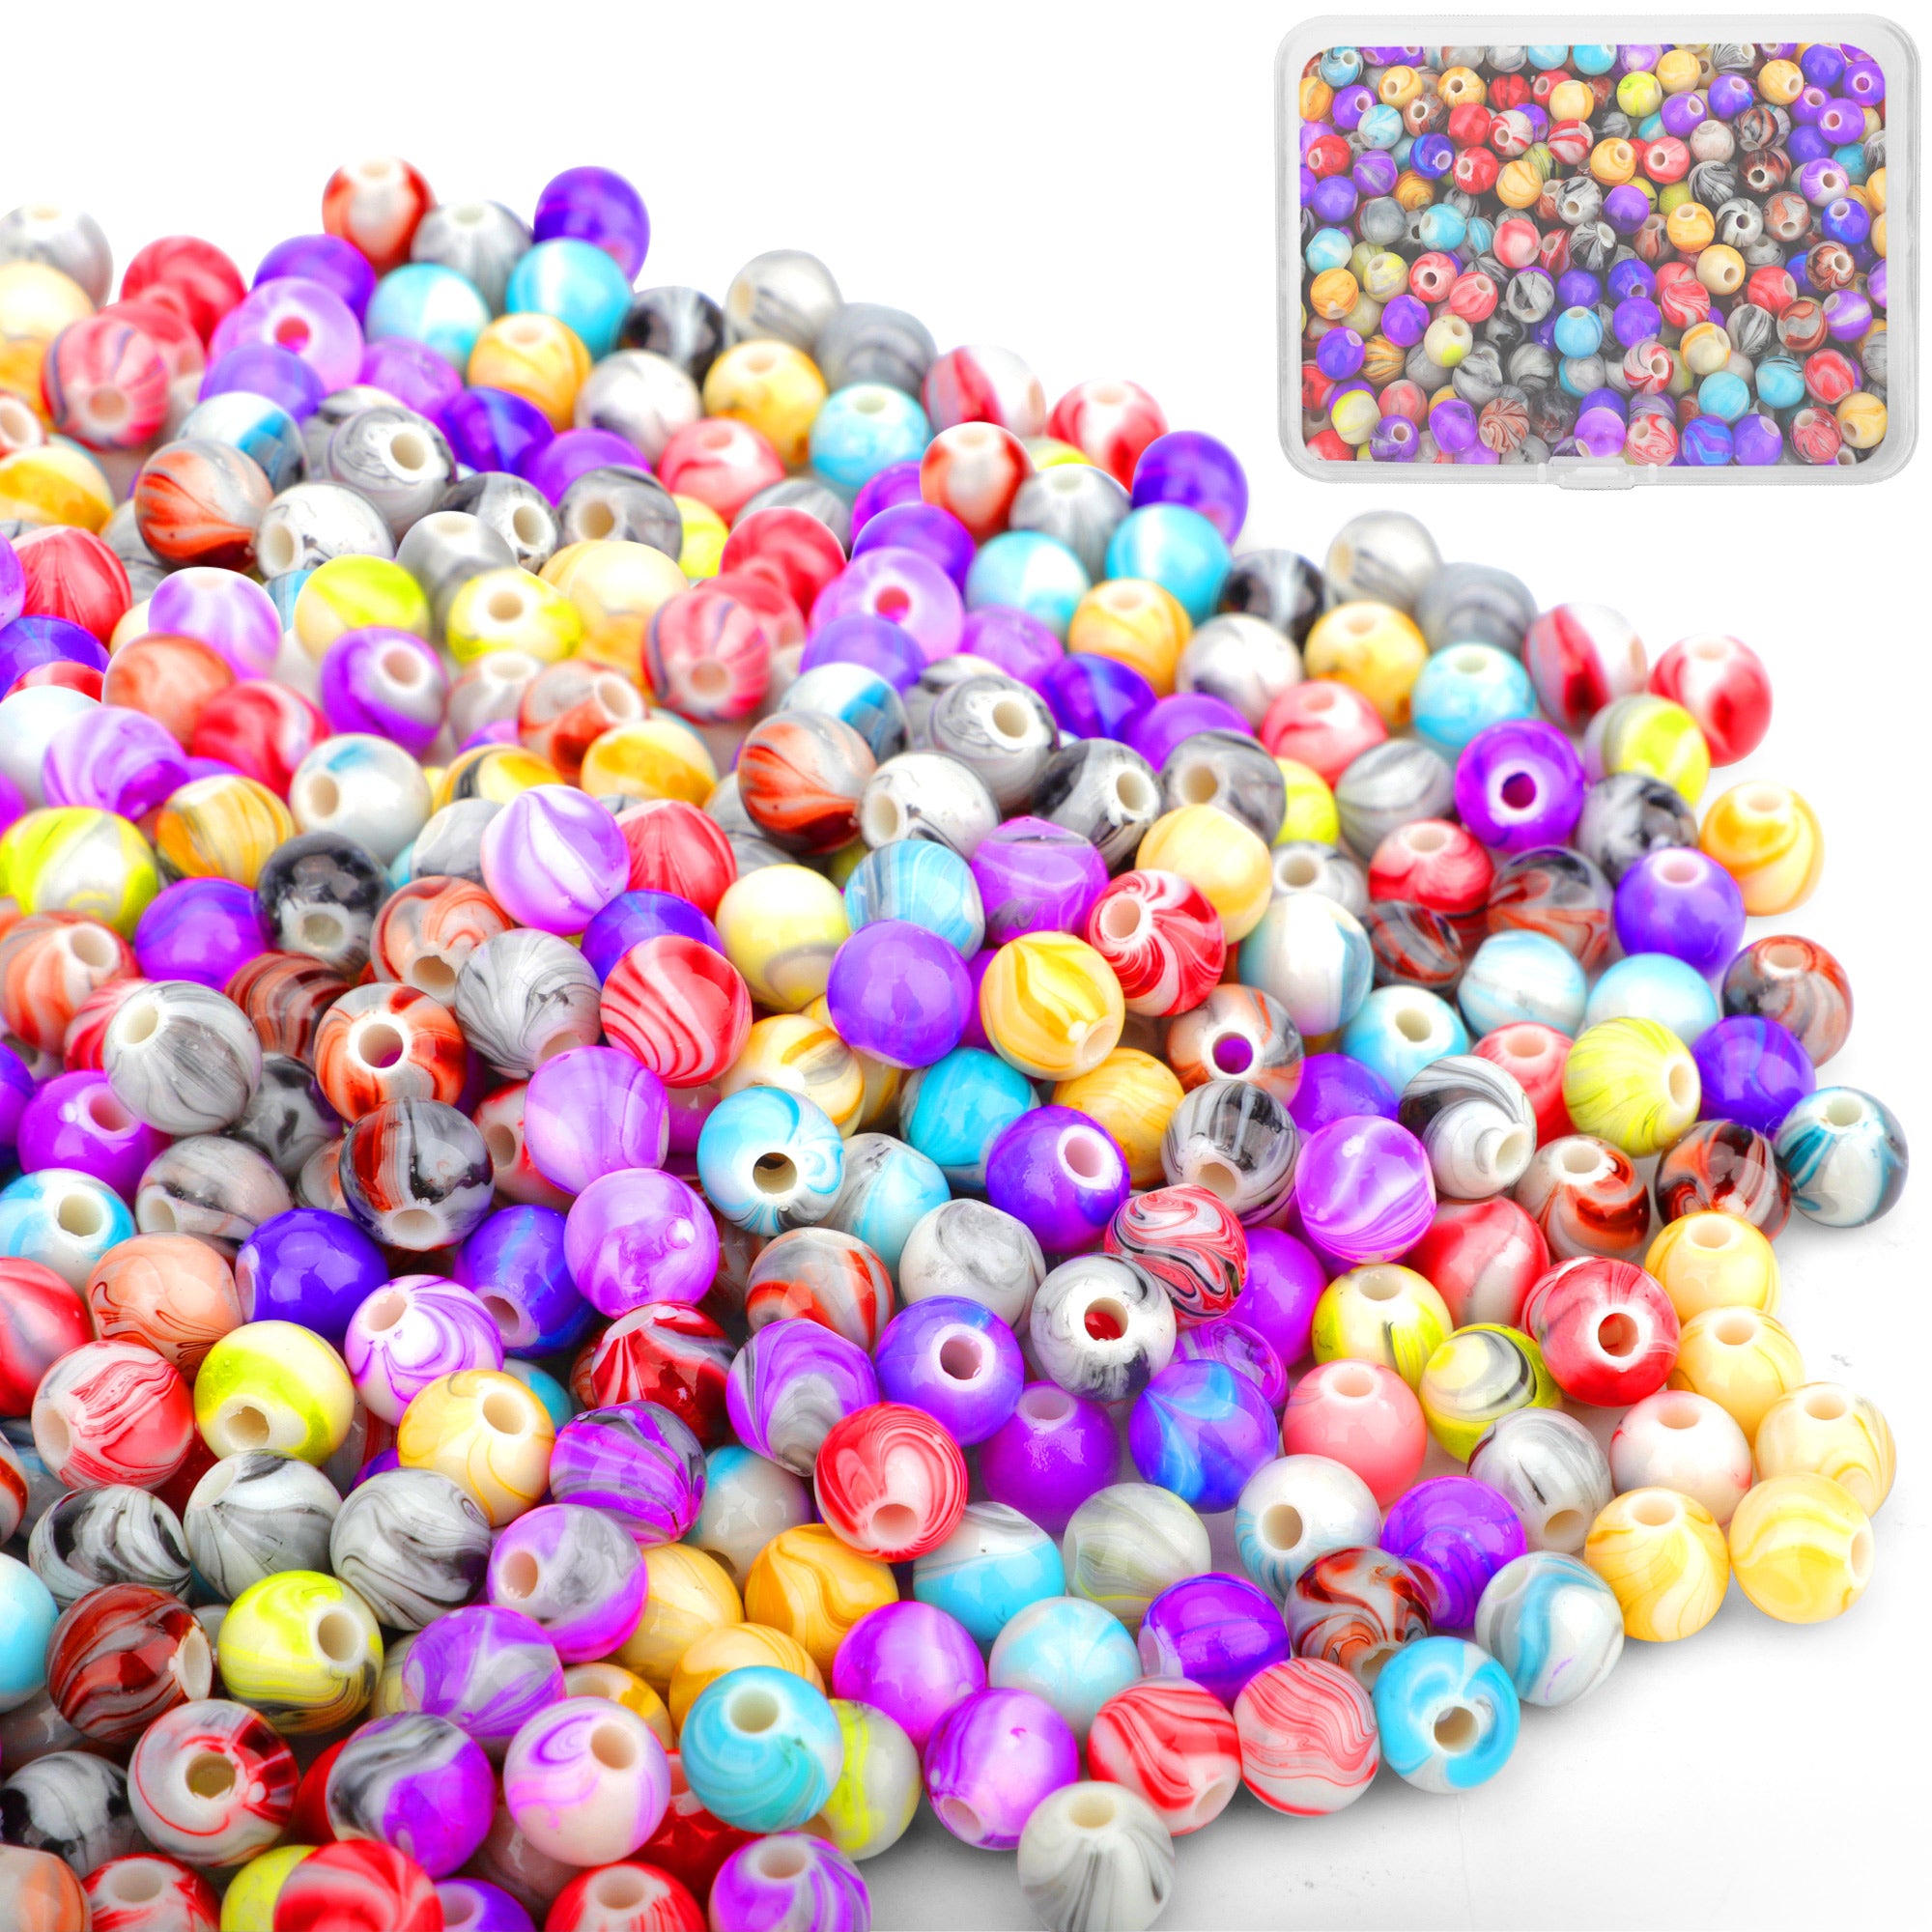 00 Pcs 8mm Multicolor Ink Pattern Acrylic Round Beads - Kids Arts and Crafts - Classroom Sensory Learning Loose Beads with Storage Box for Bracelet Necklace Jewelry Making